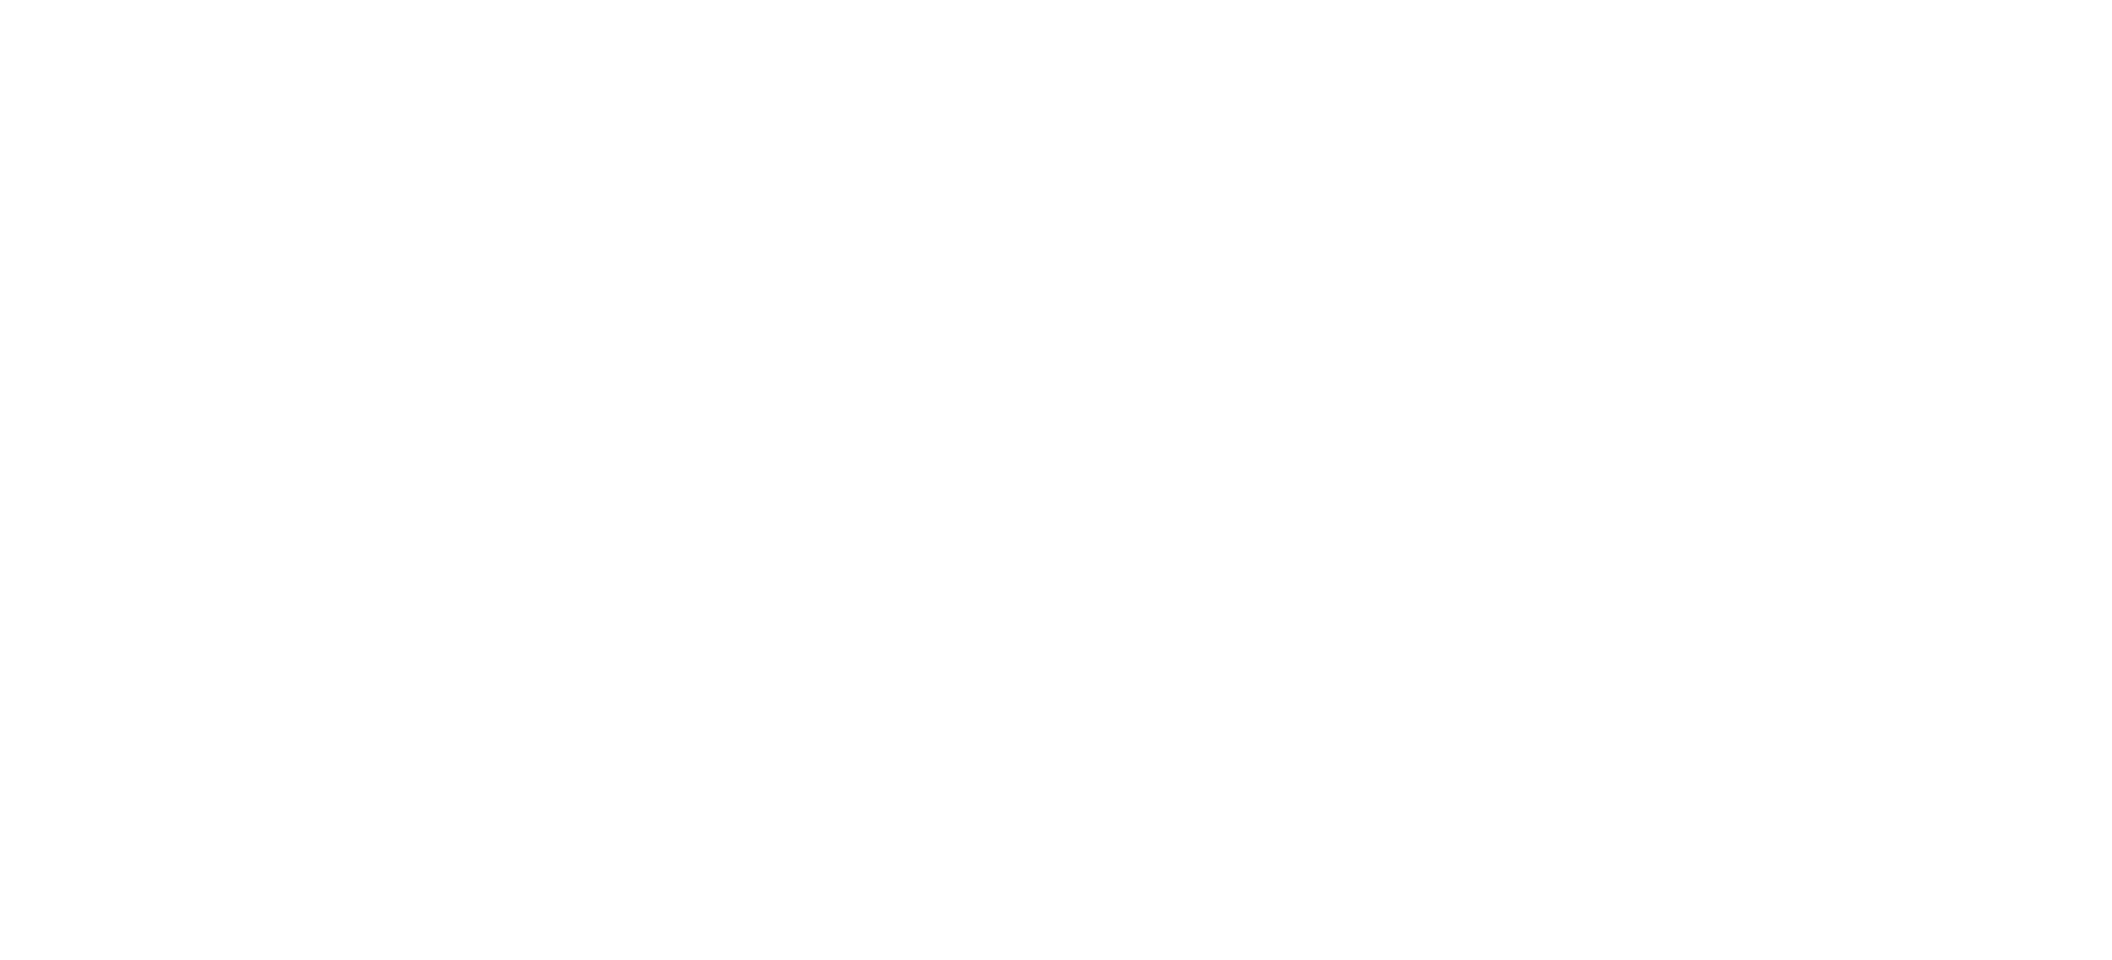 The Monarch Lakeview